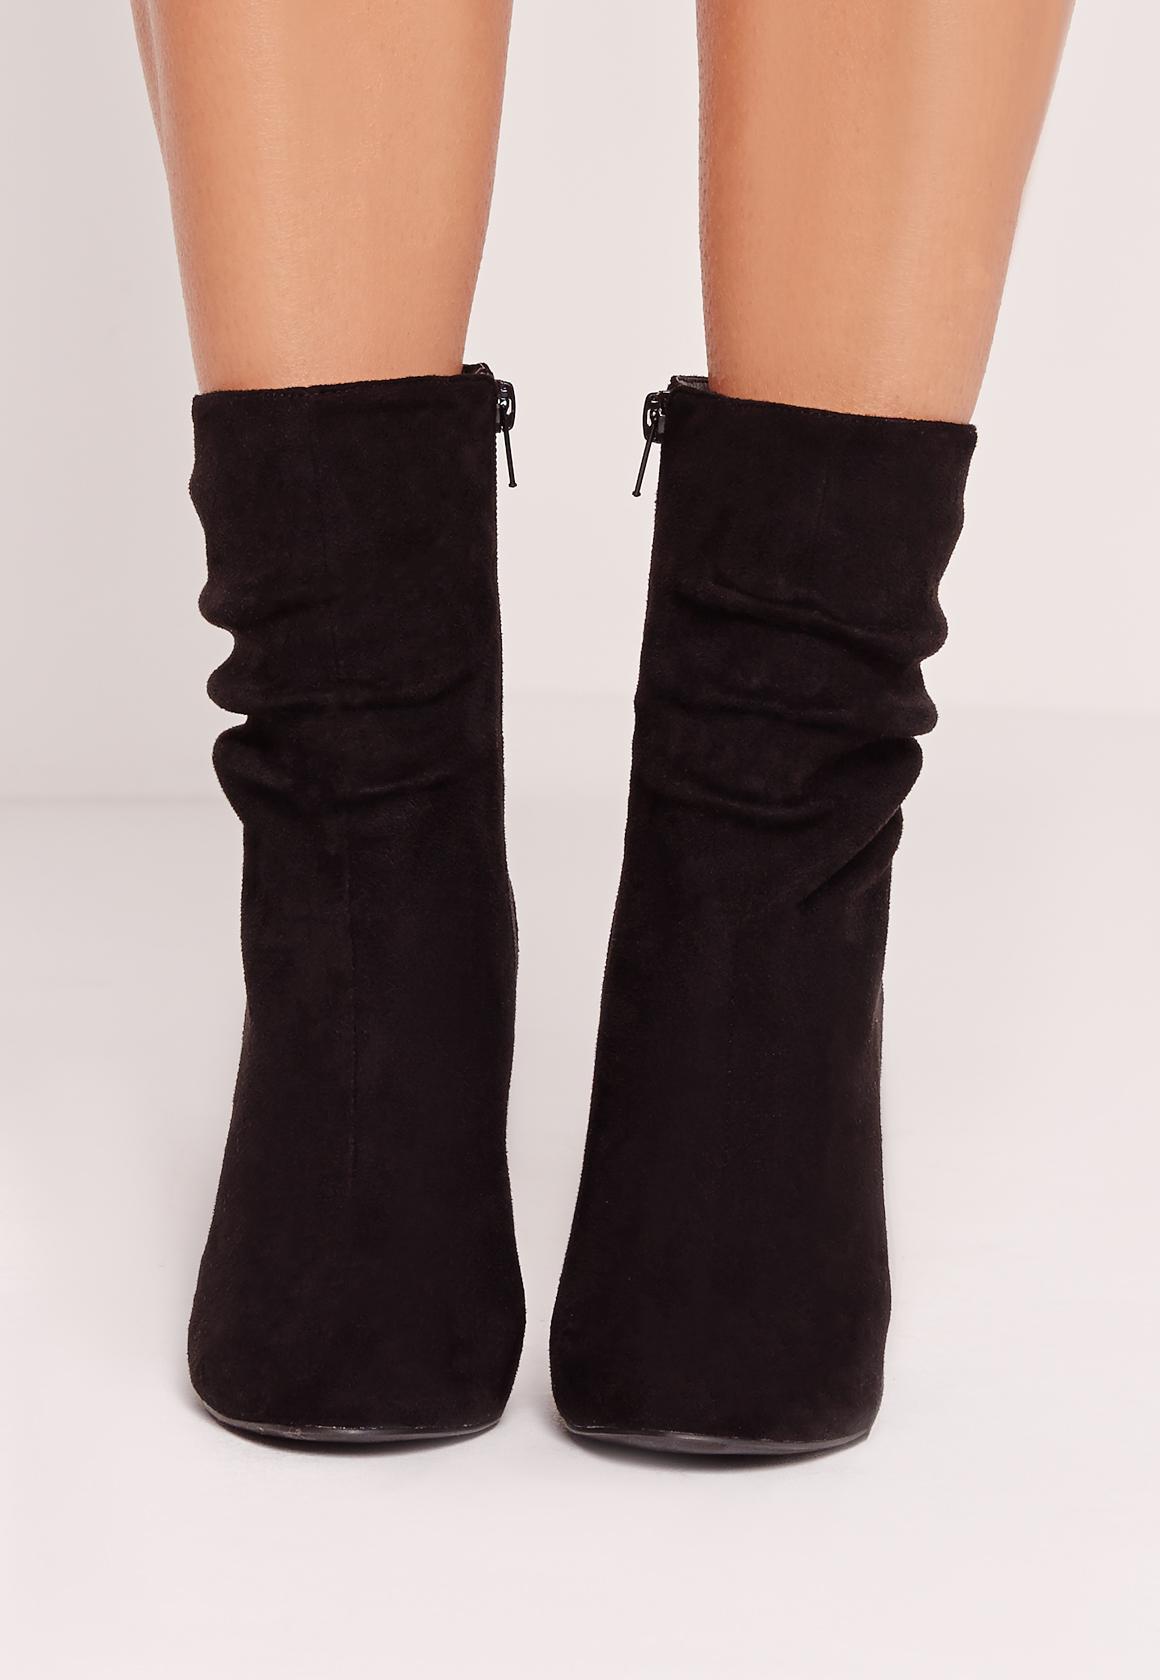 Lyst - Missguided Black Faux Suede Ruched Flared Heel Ankle Boots in Black